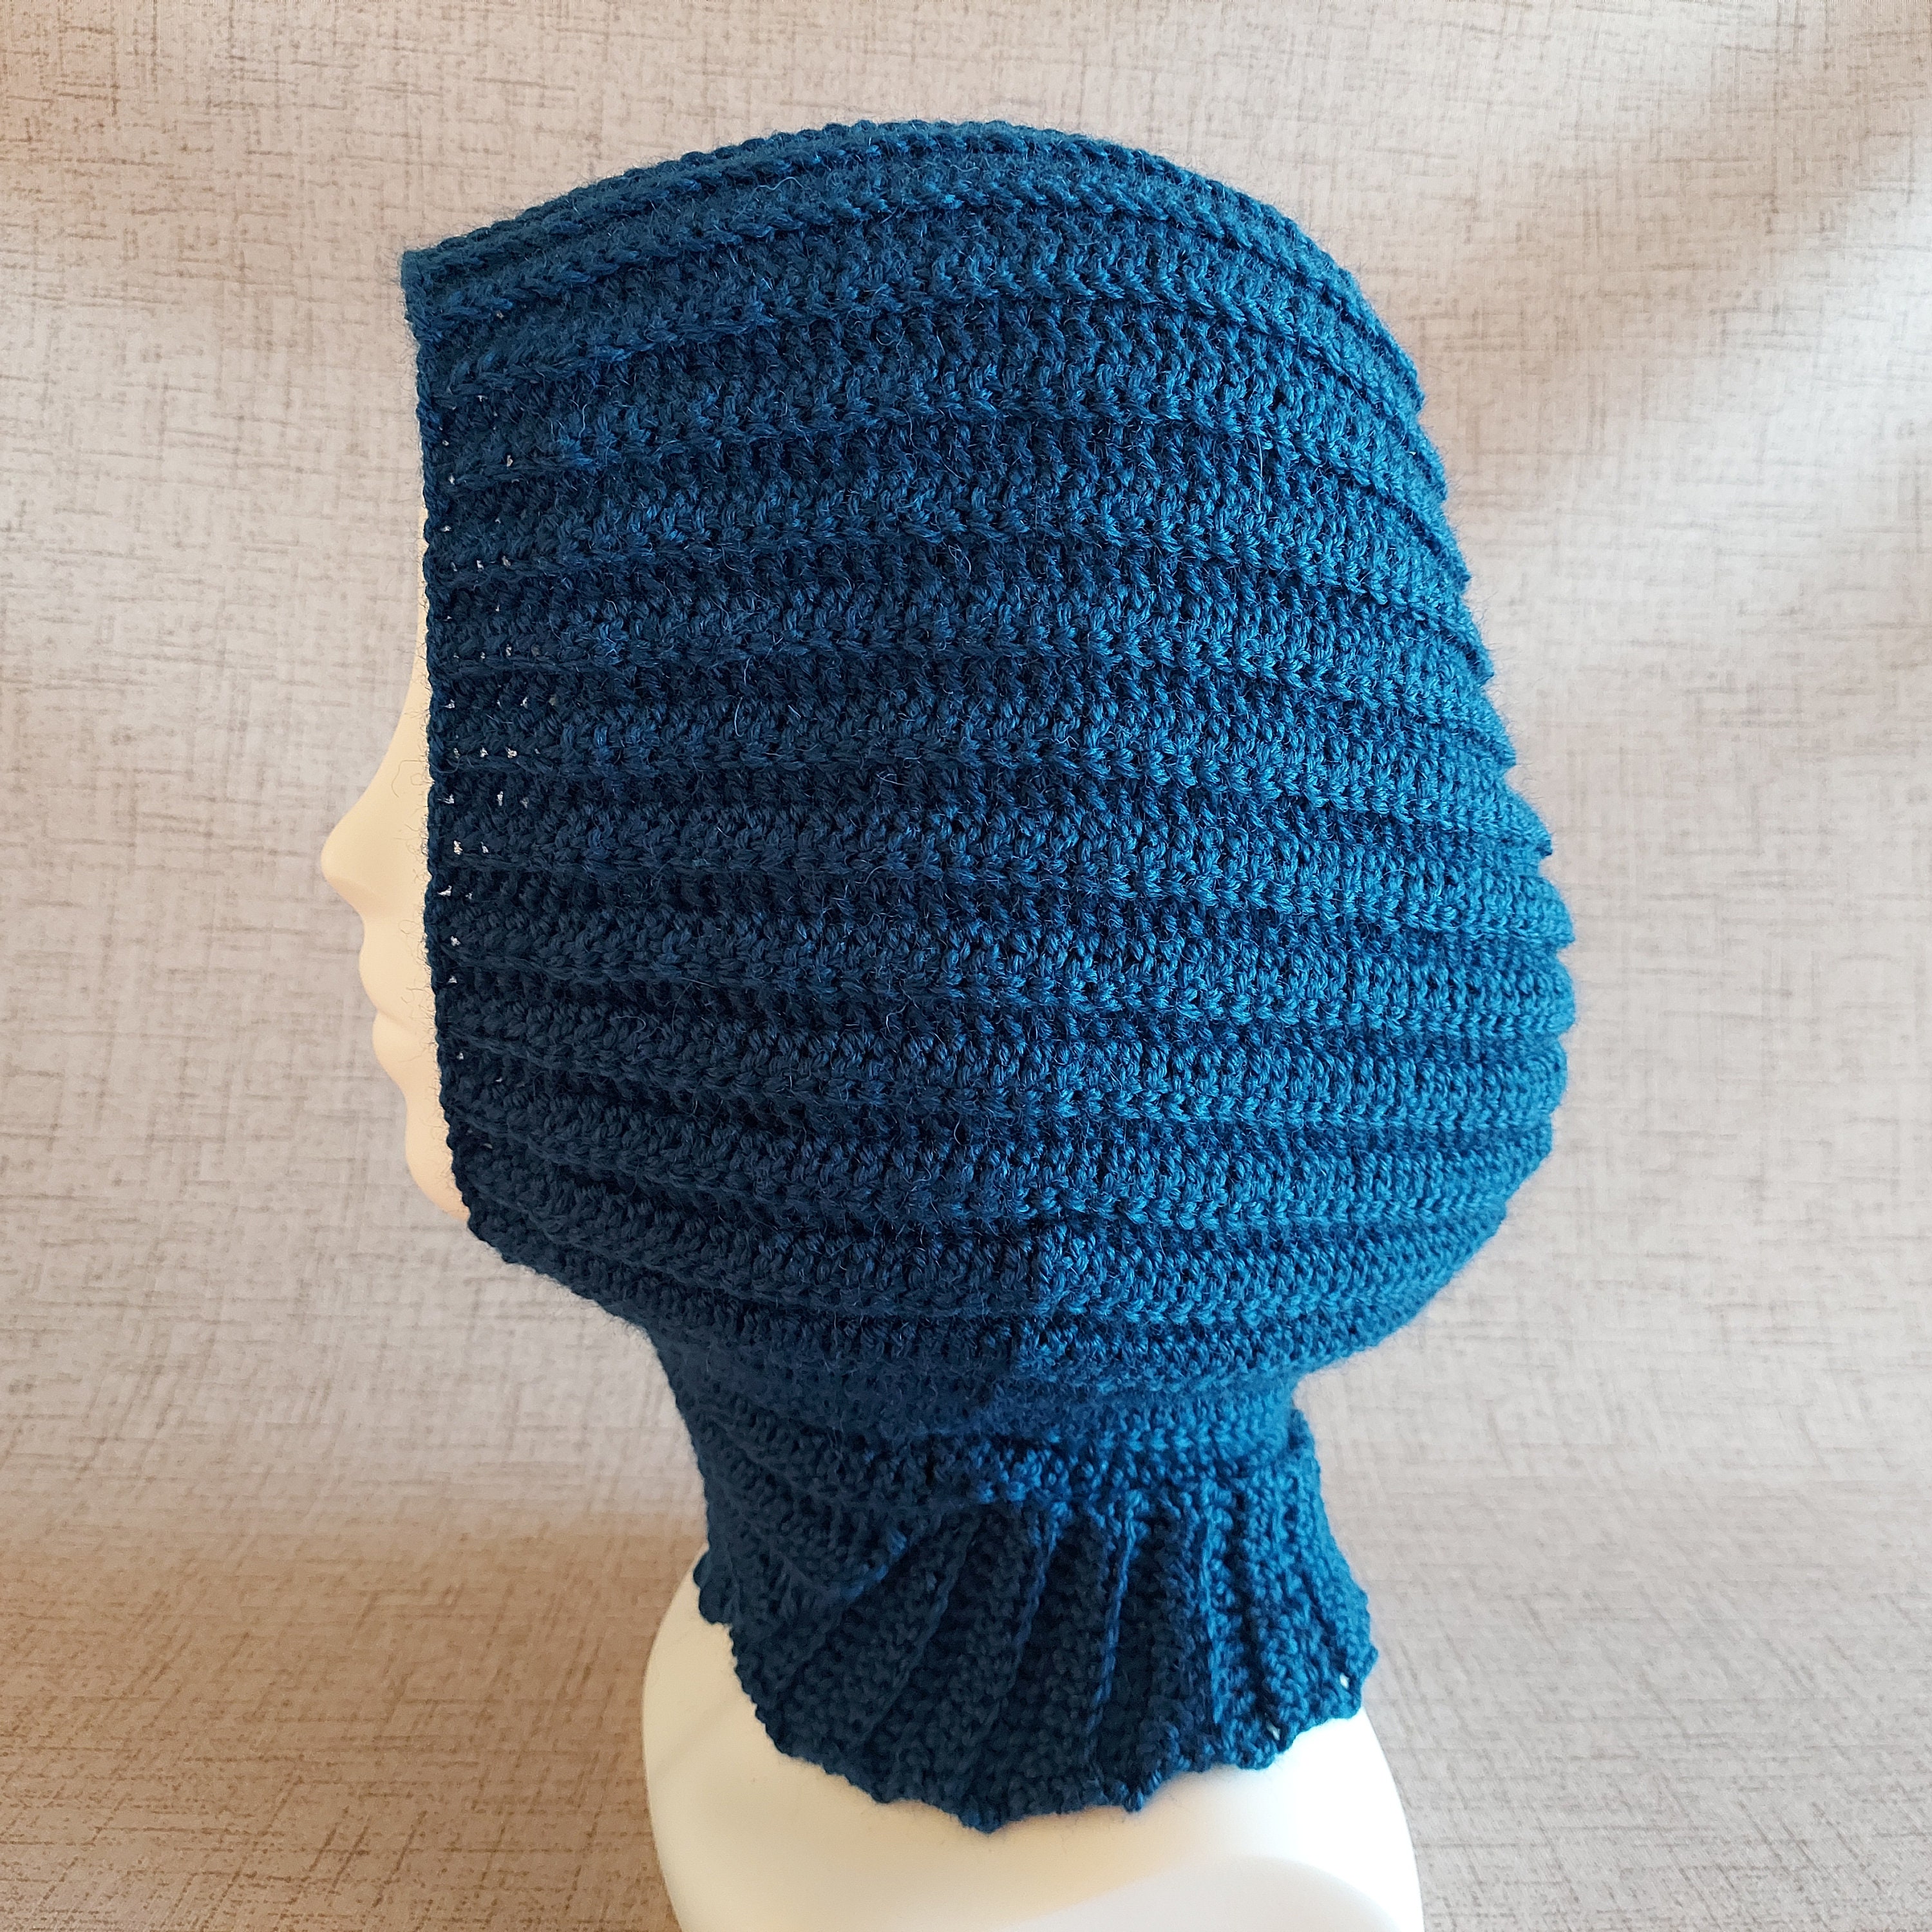 CROCHET PATTERN Hair Covering Hooded Cowl Head Scarf - Etsy